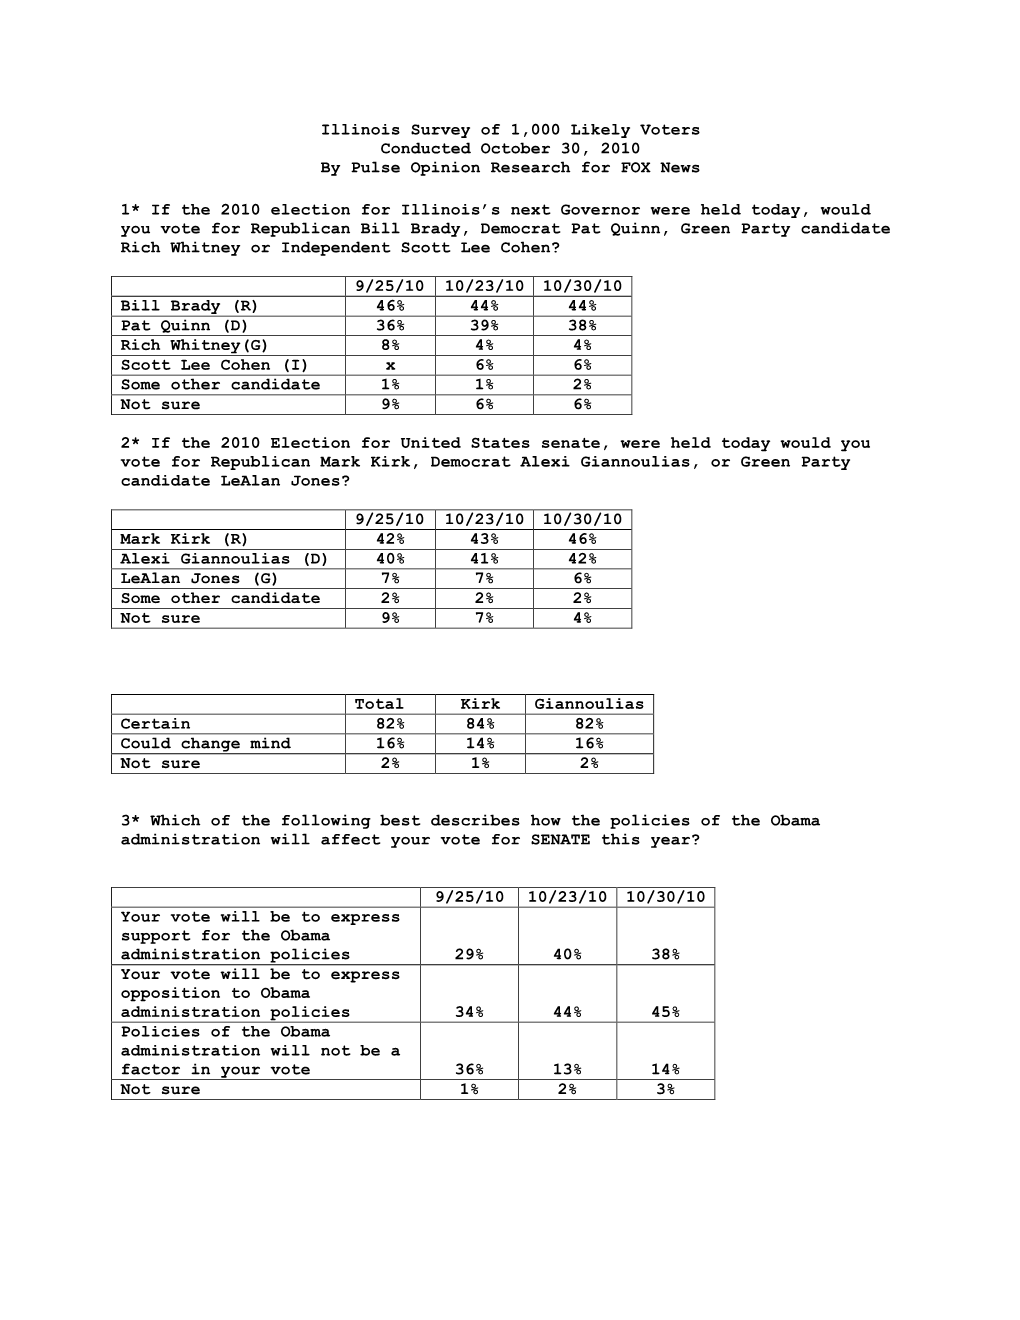 Illinois Survey of 1,000 Likely Voters Conducted October 30, 2010 by Pulse Opinion Research for FOX News